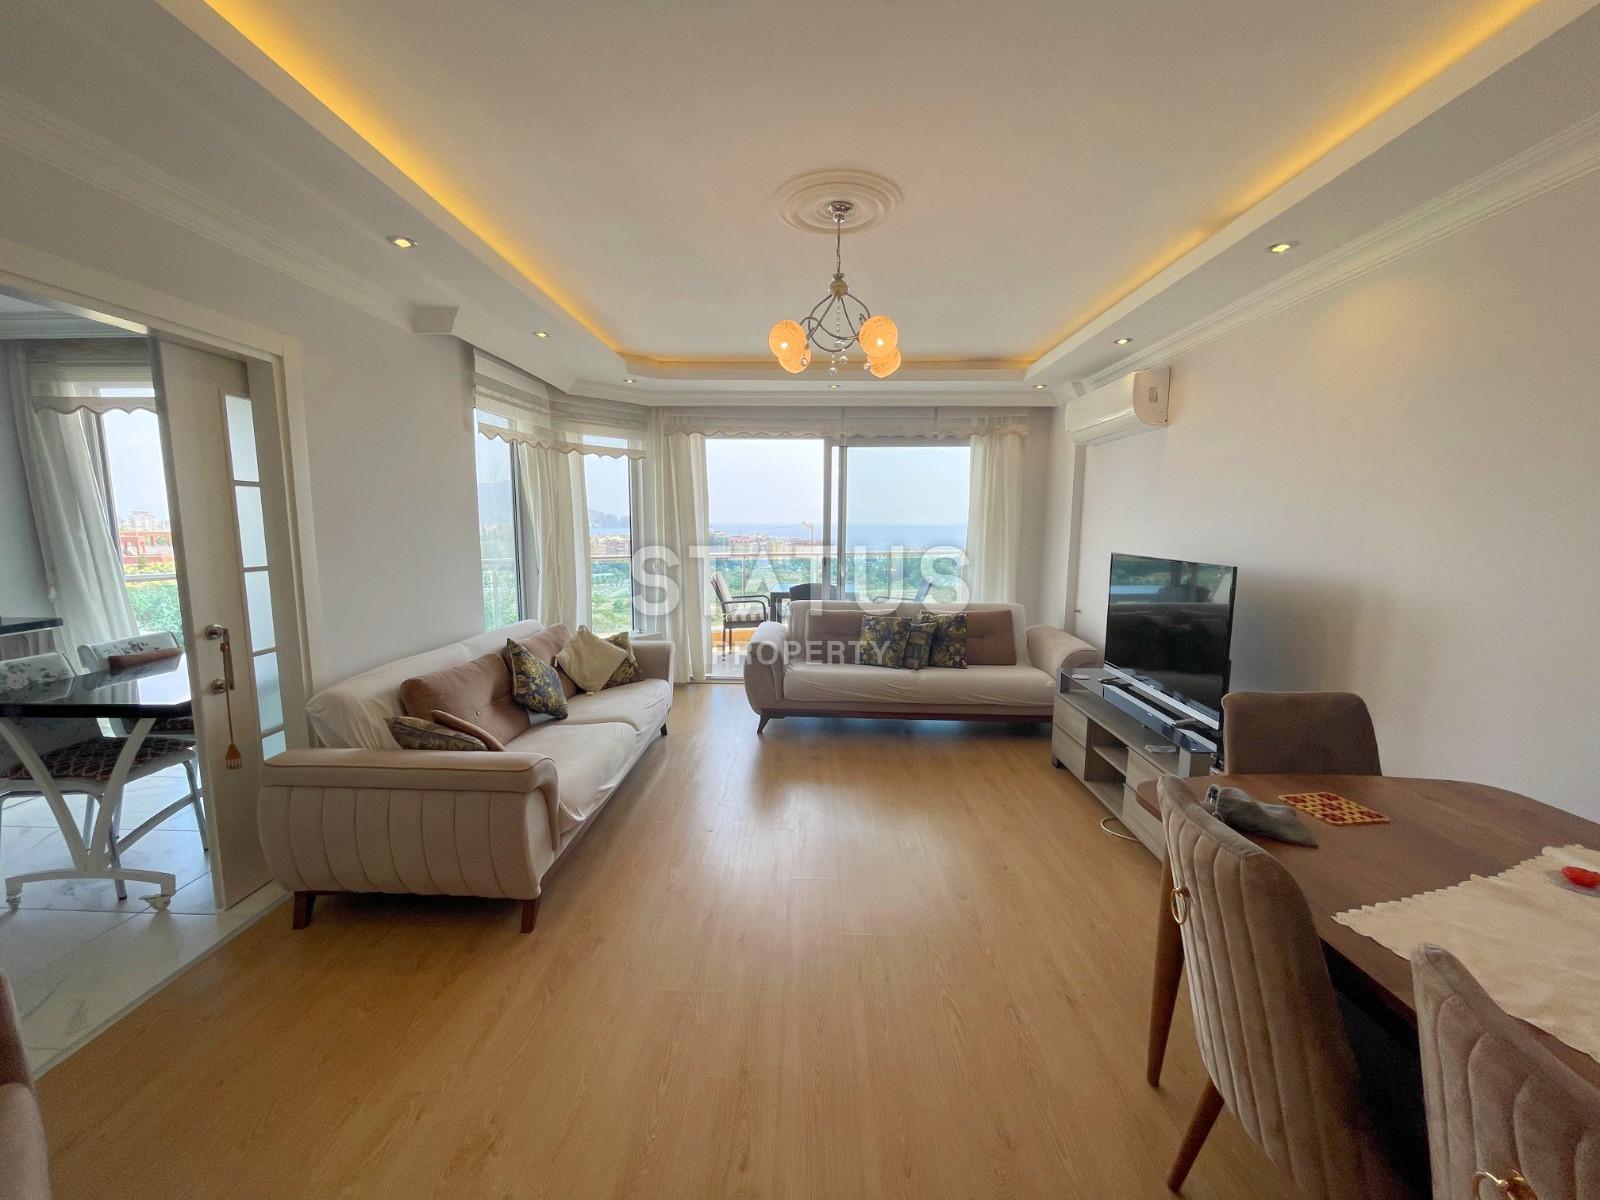 Four-room furnished apartment overlooking the Cleopatra beach. 200m2 фото 2